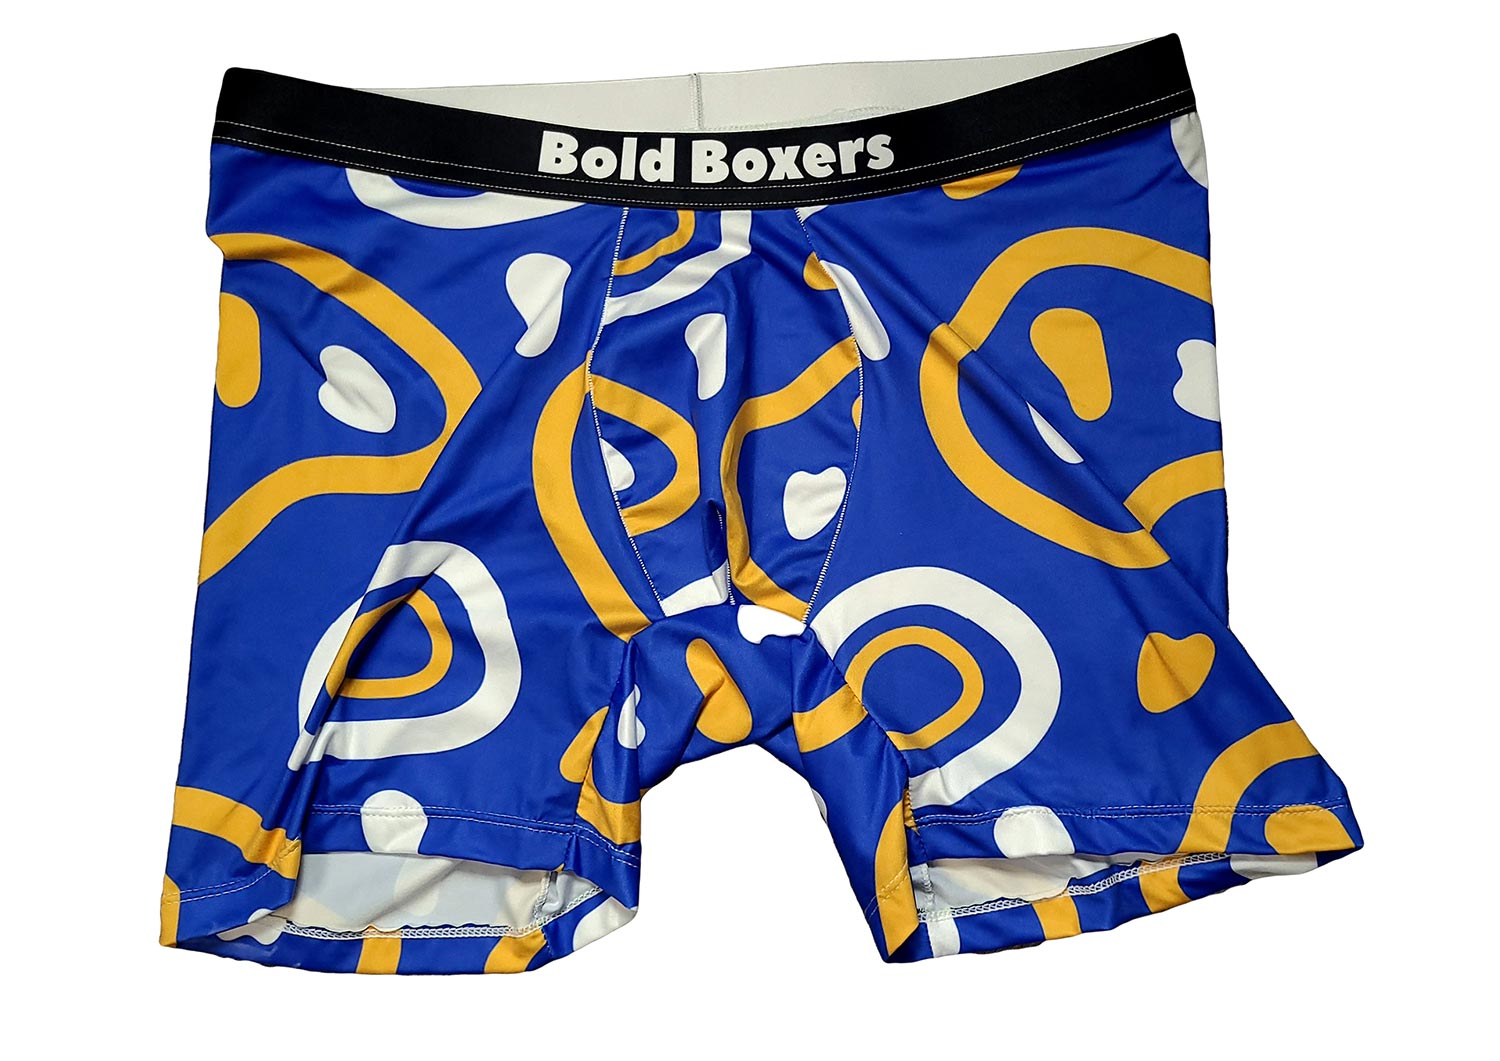 Introducing Underwear Brand – Bold Boxers - Your Average Guy